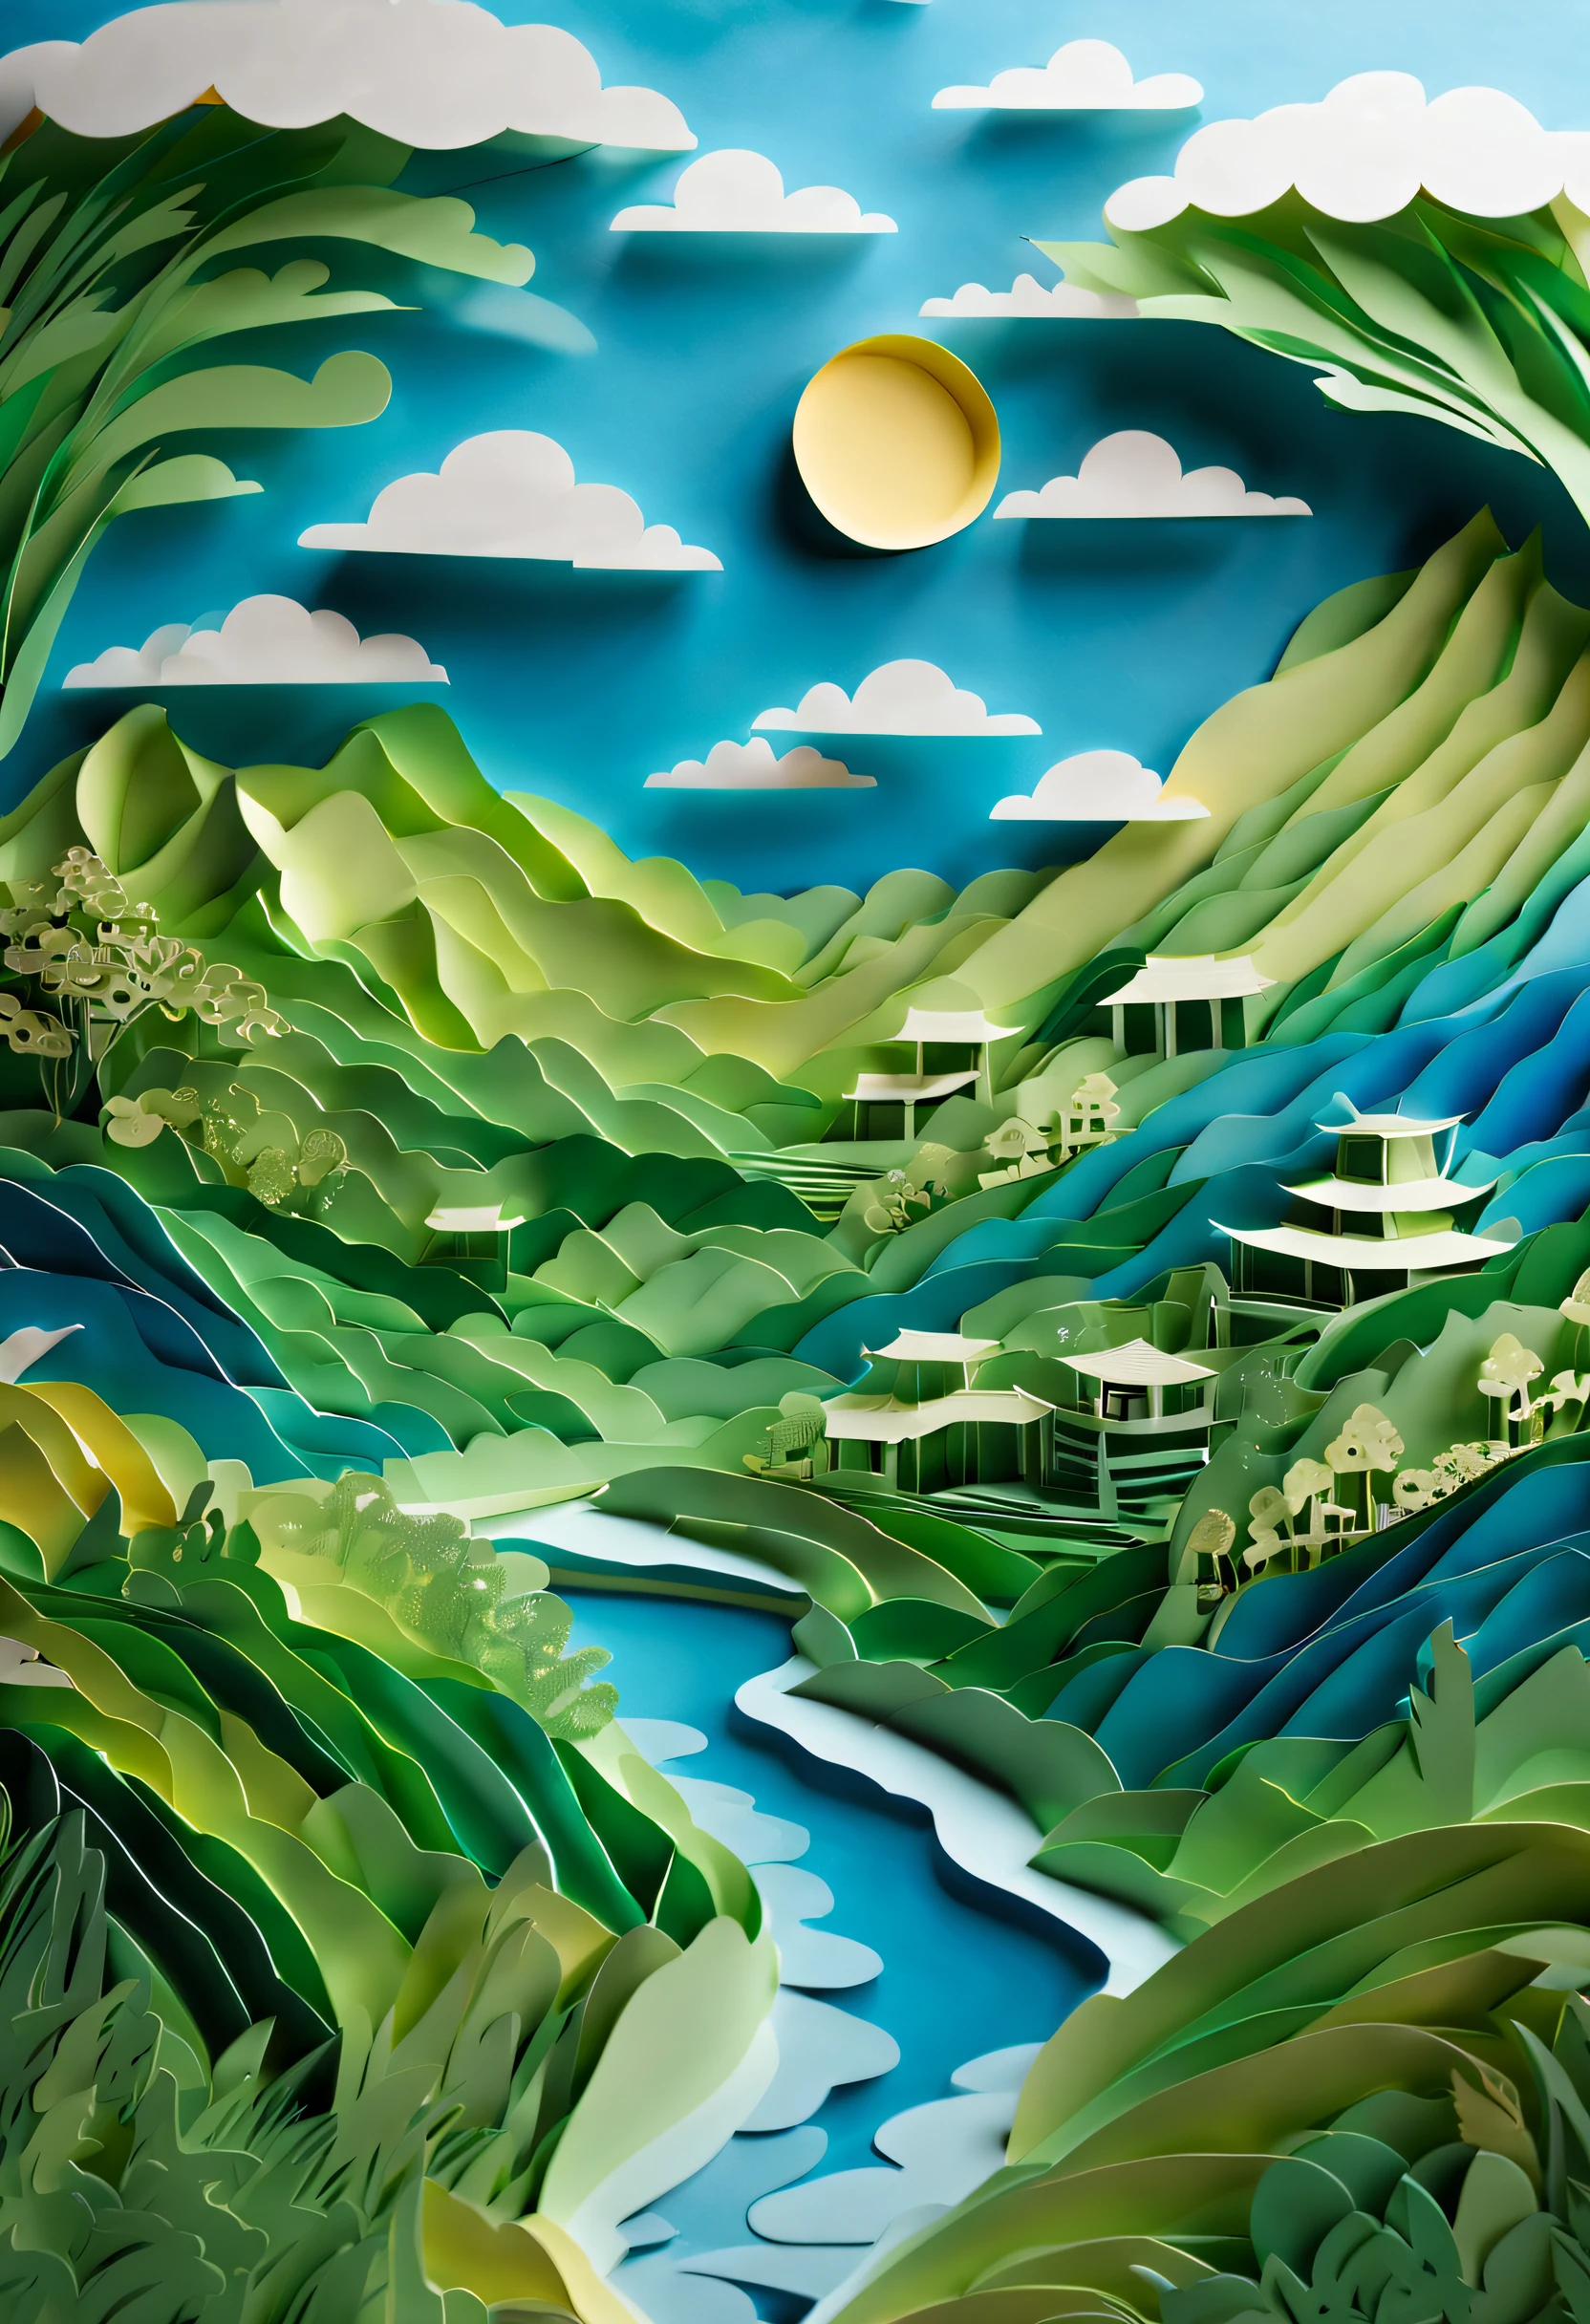 A paper art masterpiece with a stunning landscape of blue skies, white clouds, and lush green mountains and waters. The artwork showcases intricate paper cut-outs of terraced fields, bringing depth and dimension to the scene. The image quality is of the highest standard, with ultra-detailed paper textures and sharp focus. The paper art is skillfully crafted, resulting in a realistic and vivid portrayal. The colors are vibrant, with a harmonious blend of blues, greens, and whites. The lighting enhances the beauty of the scenery, with soft rays of sunlight illuminating the landscape. The artwork reflects the artistry of paper cutting, creating a captivating and awe-inspiring piece.